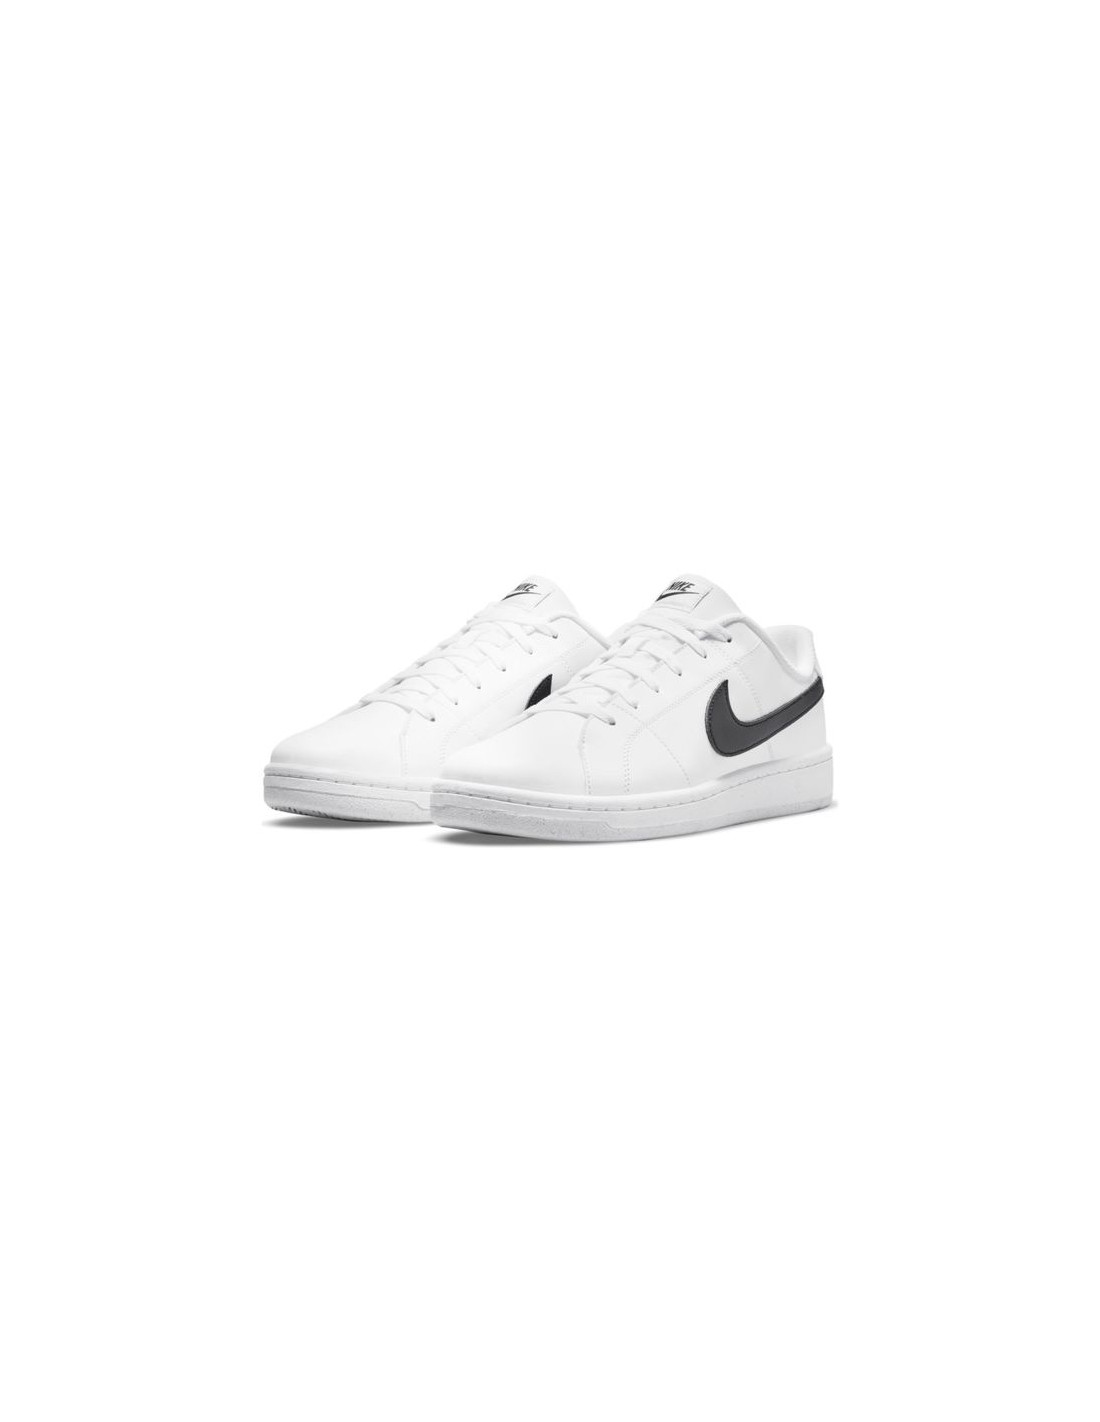 NIKE COURT ROYALE 2 BETTER ESS